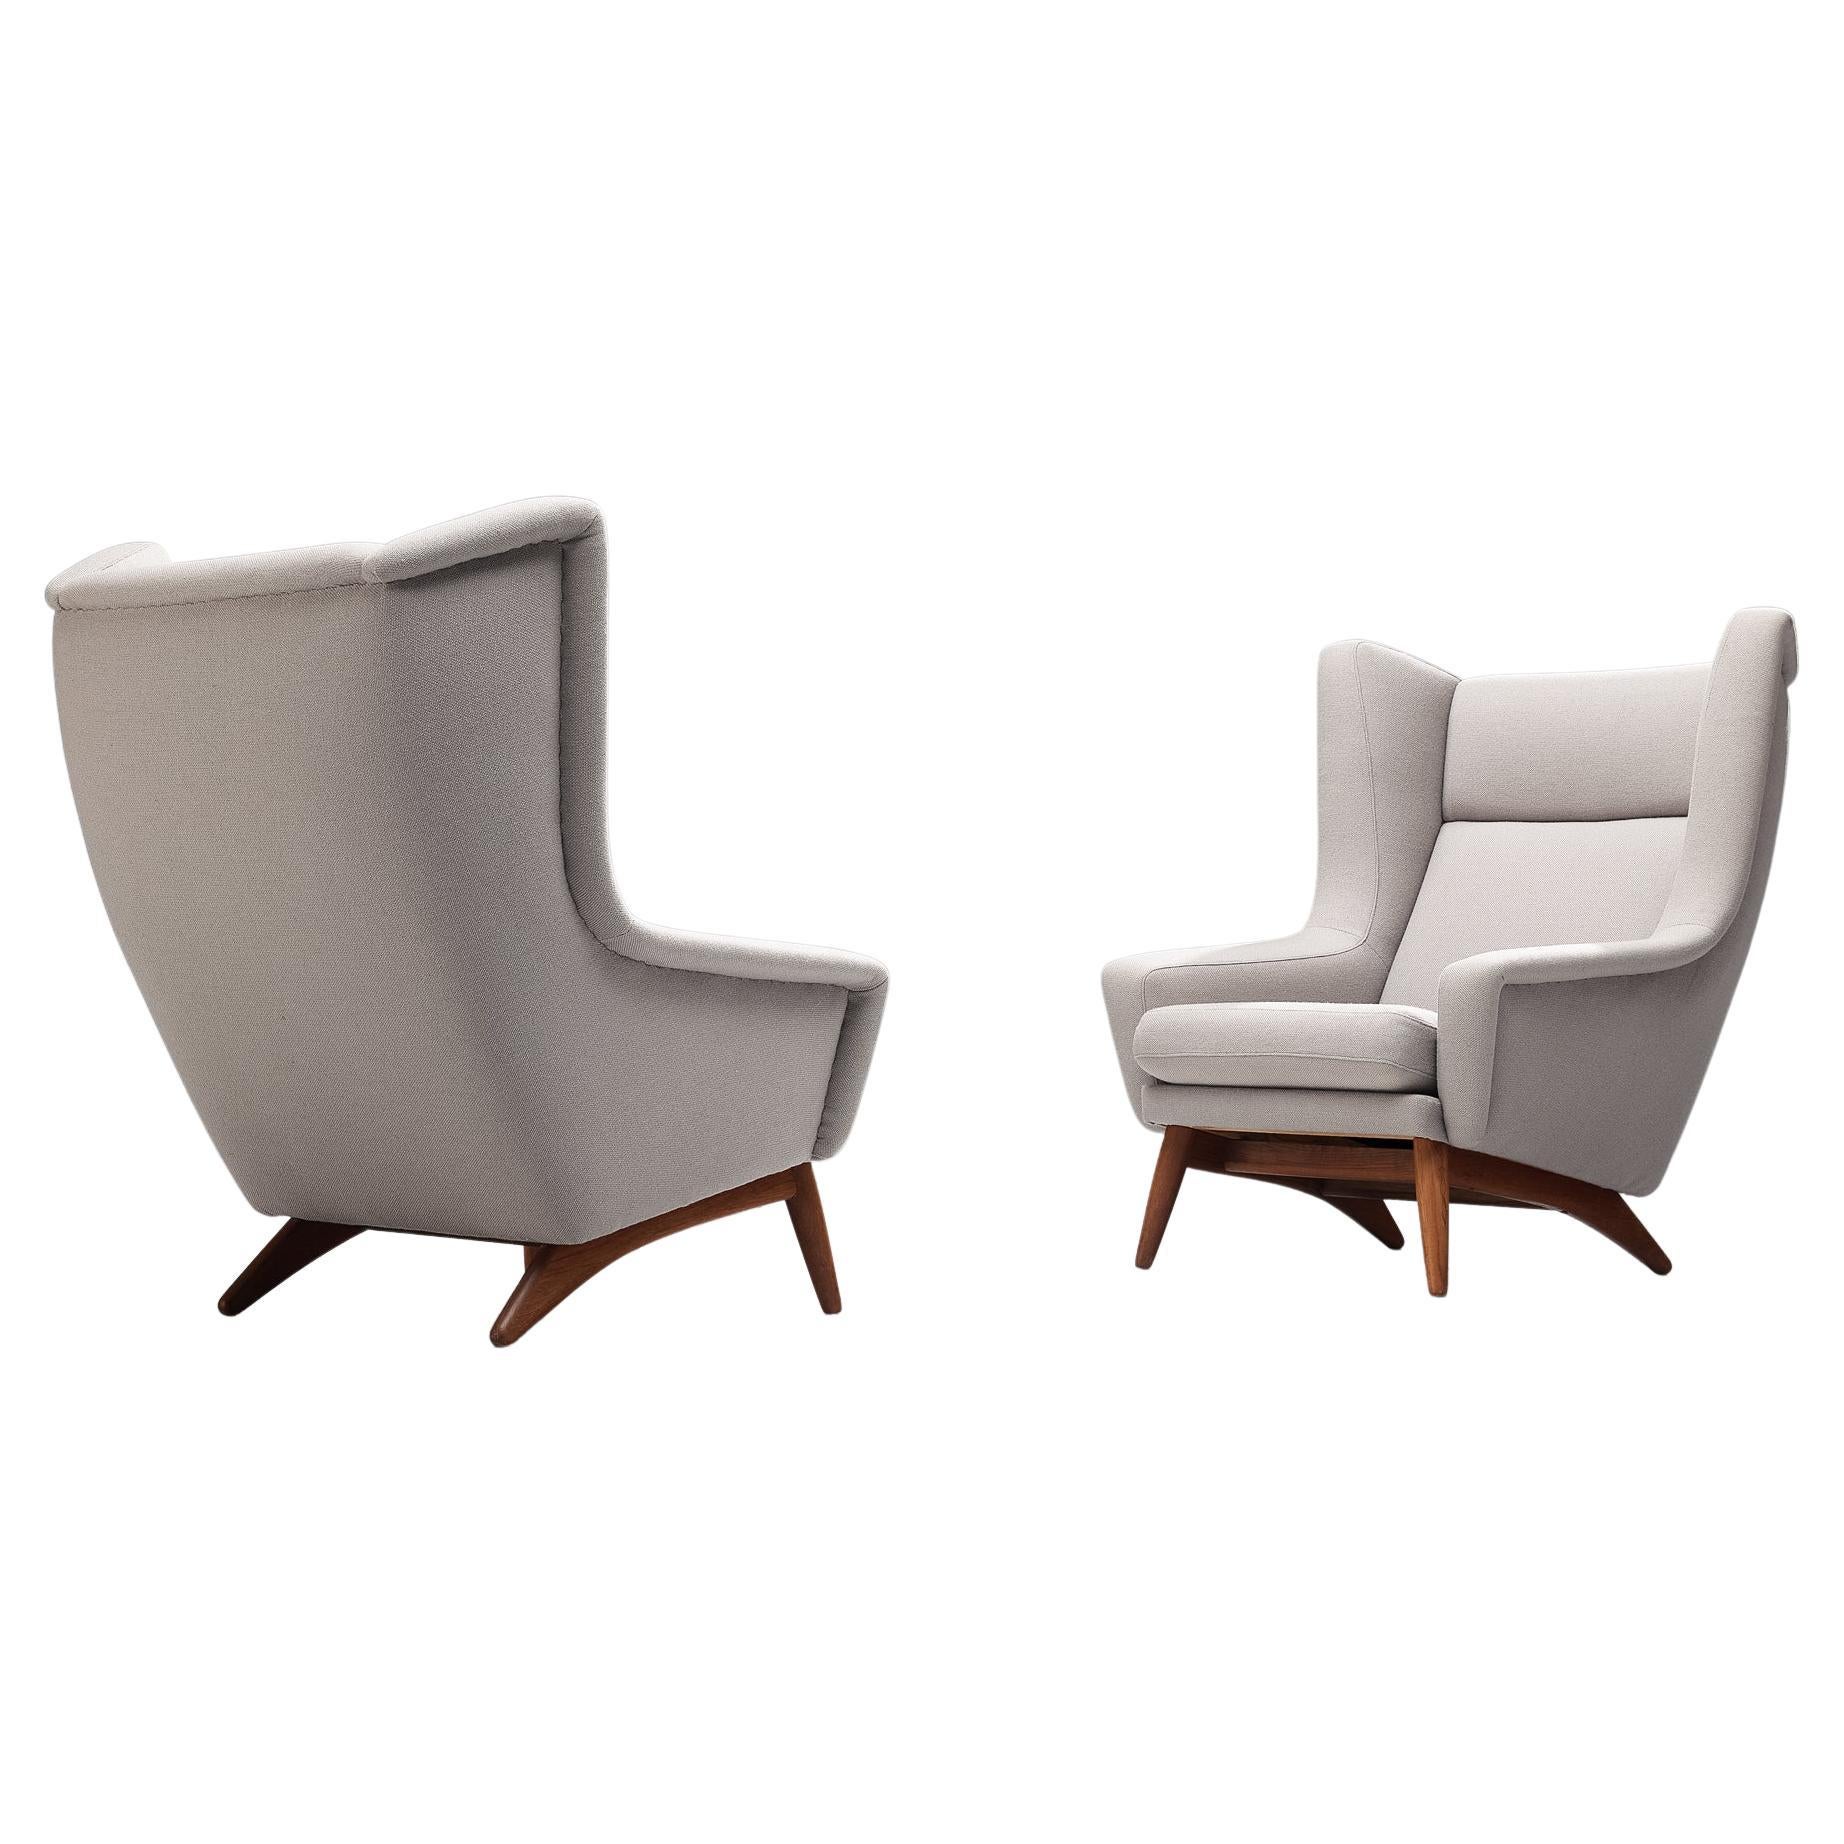 Customizable Pair of Danish Wing Back Chairs with Teak Frame